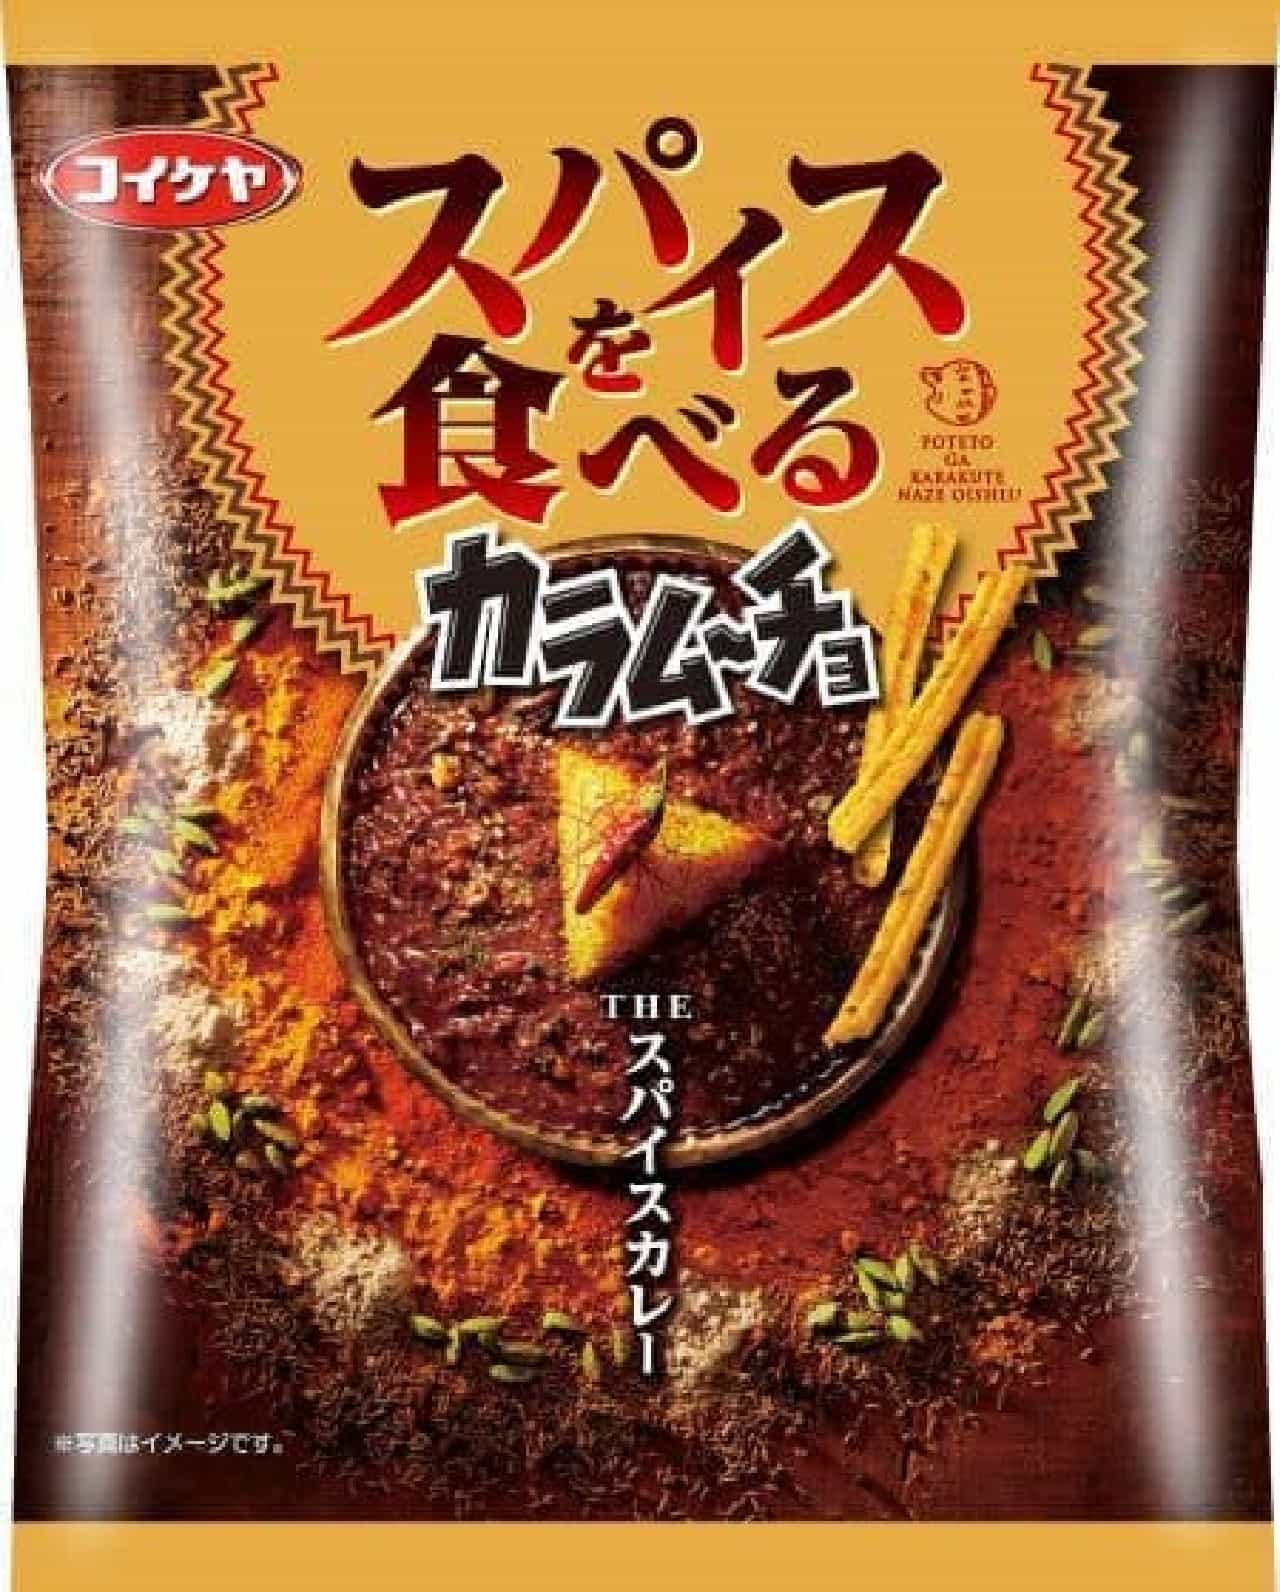 Karamucho "Eating spices Karamucho THE Spice Curry"